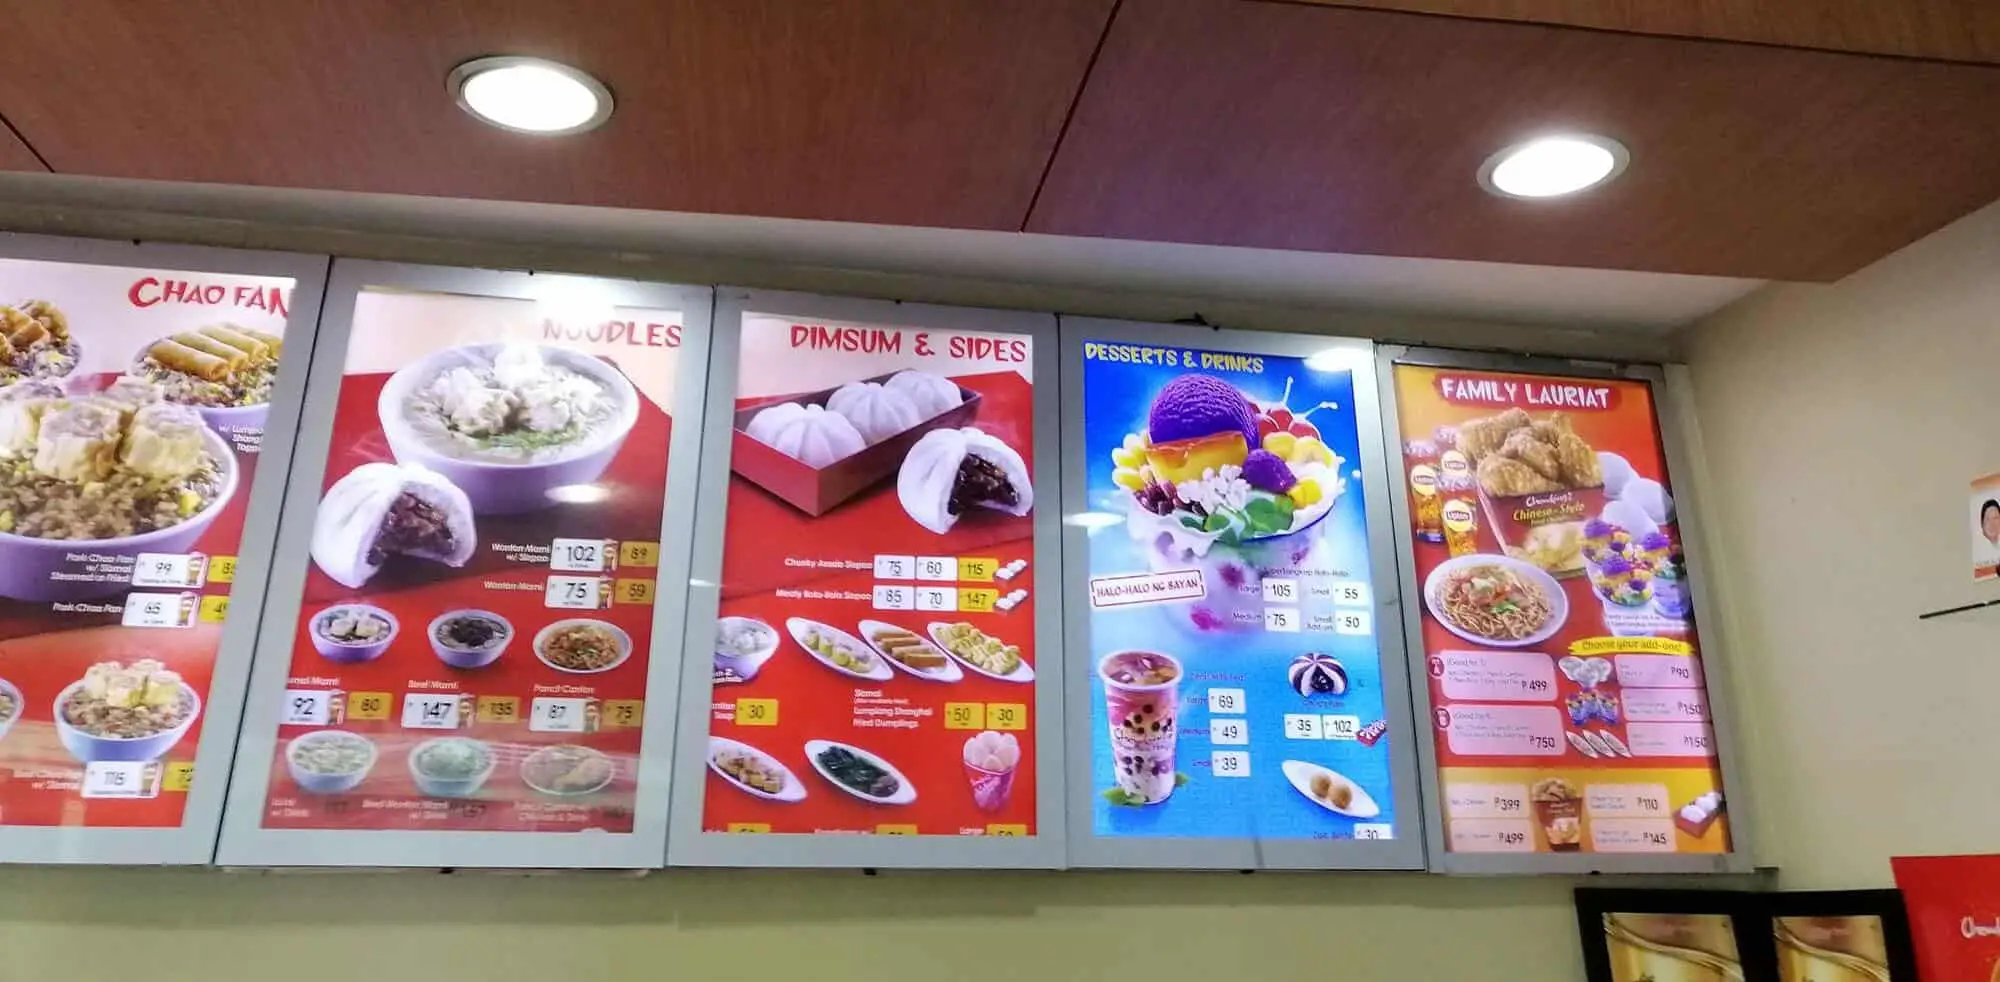 Dimsum, Sides And Noodles On The Chowking Menu